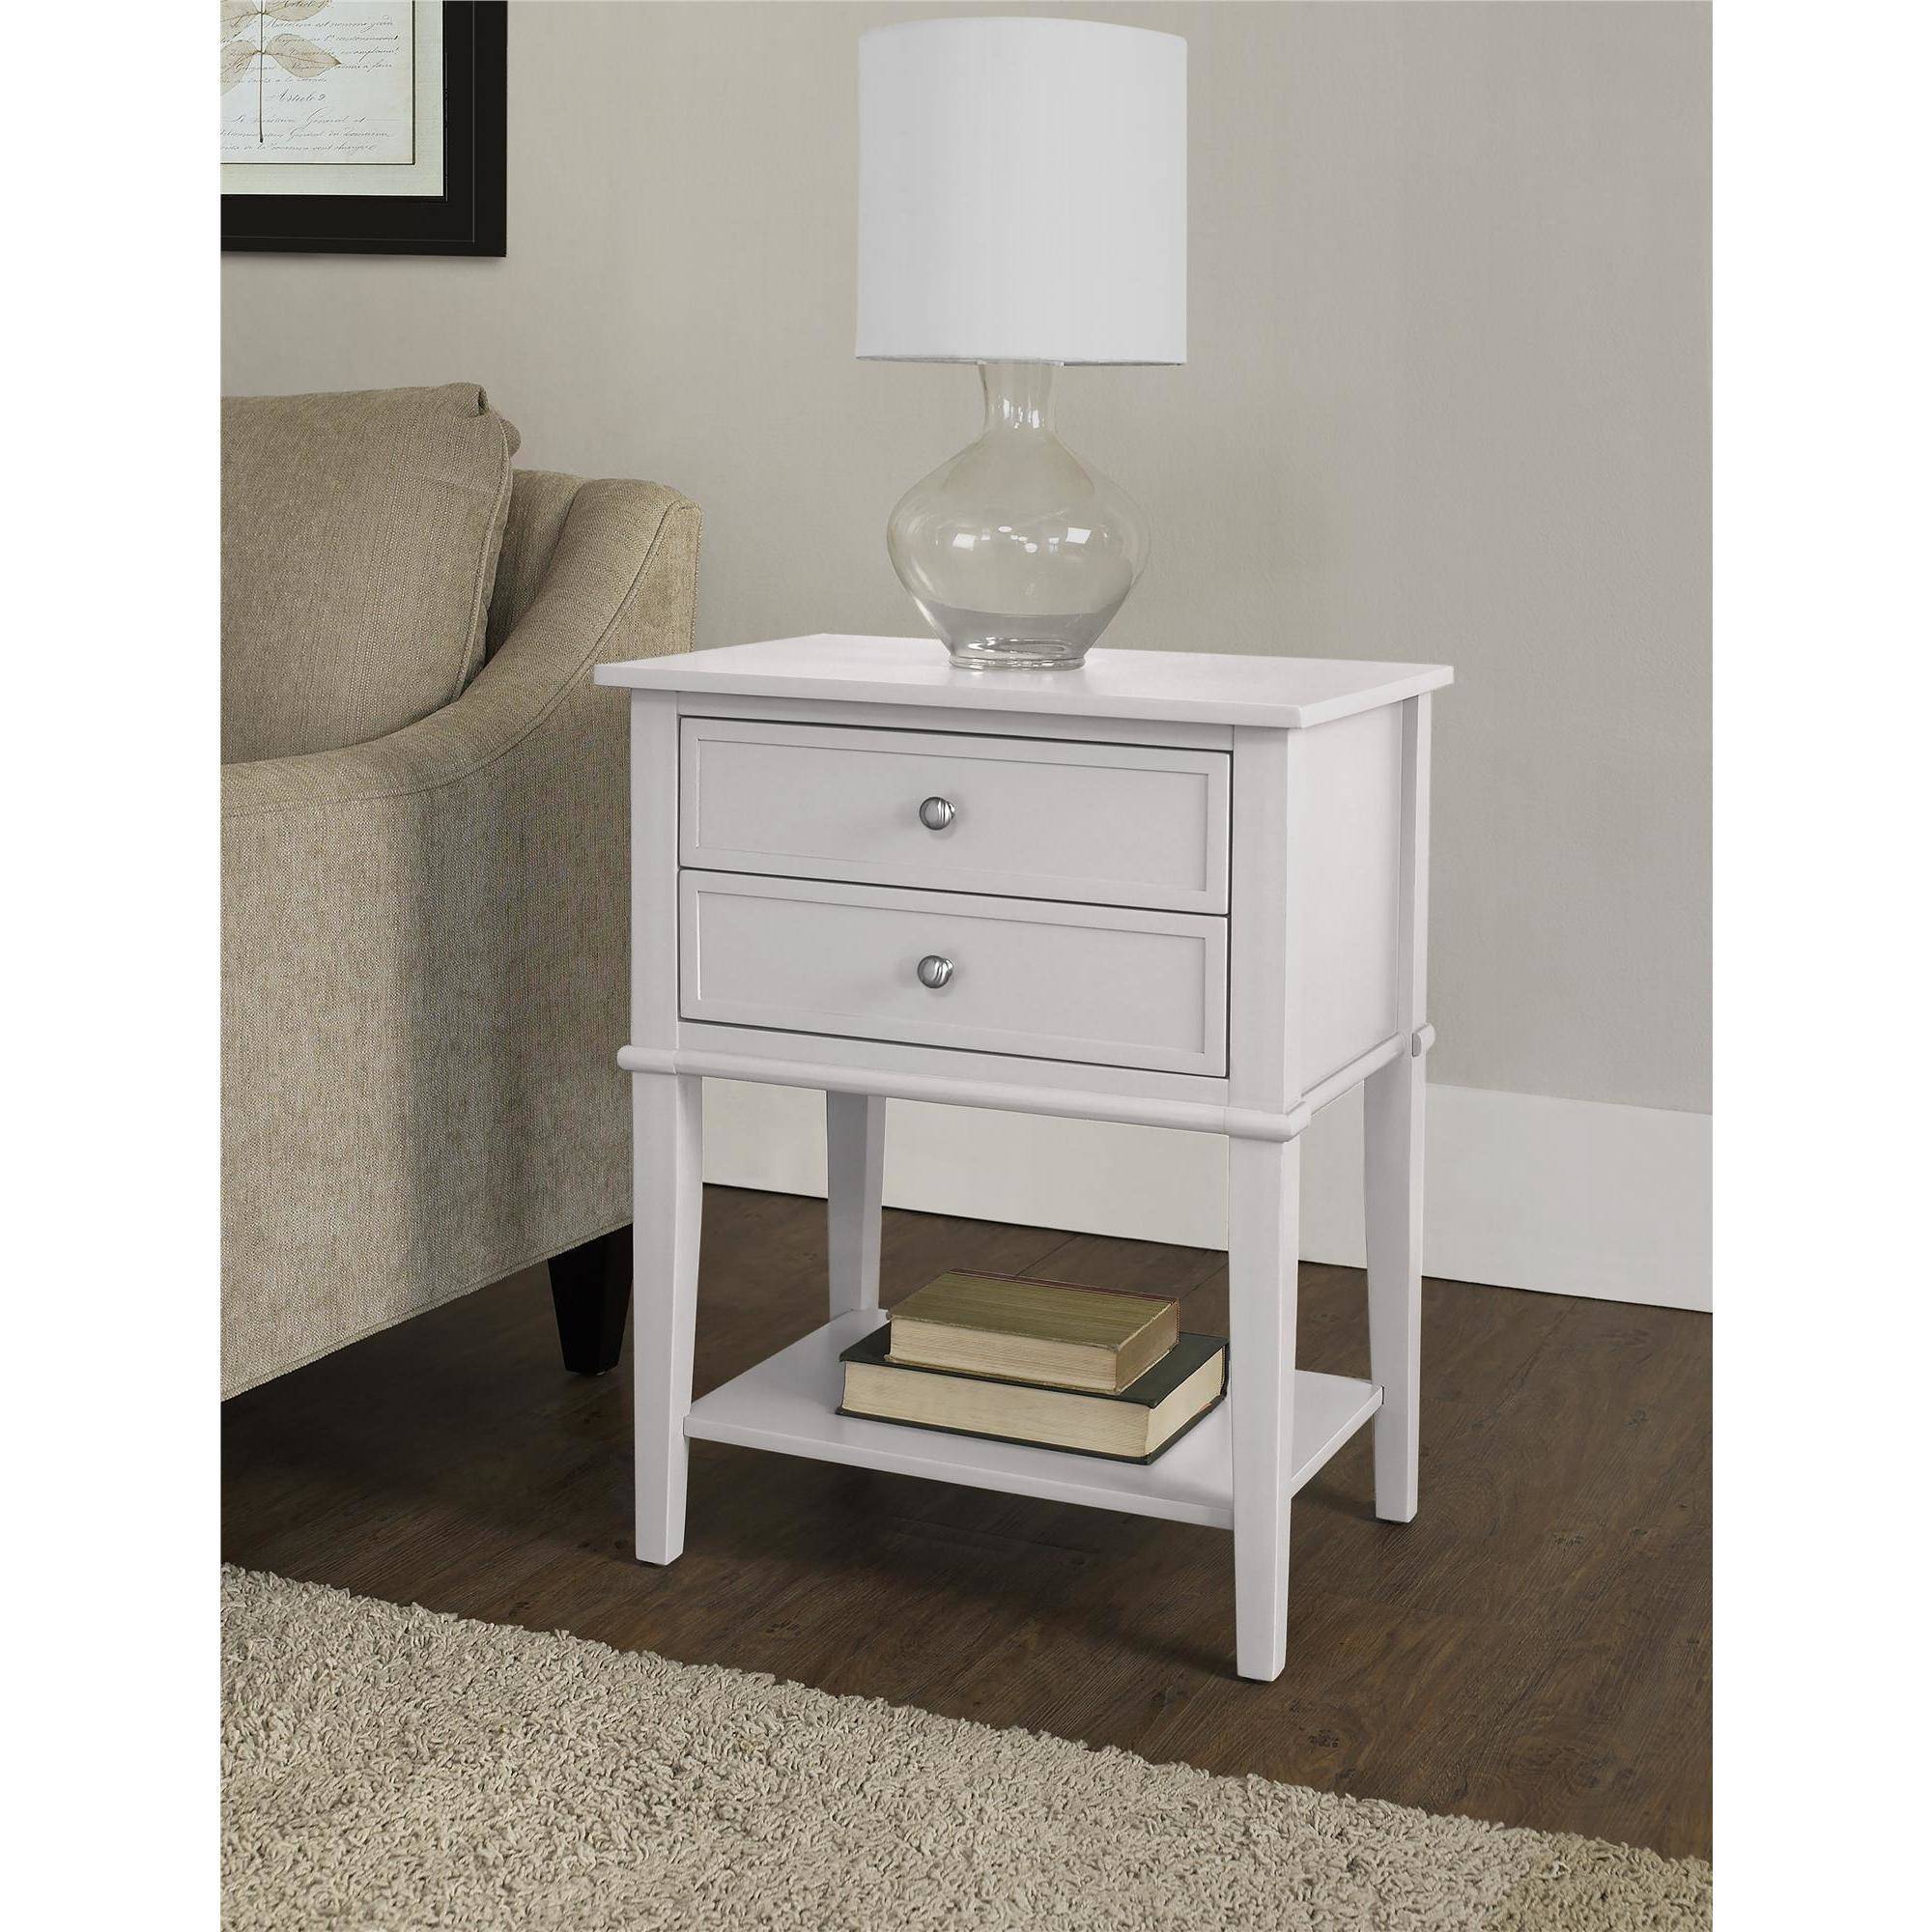 altra franklin accent table with drawers white bedroom end tables multiple colors ture sofa stools underneath reclaimed wood nightstand dining ideas carolina panthers stuff rustic